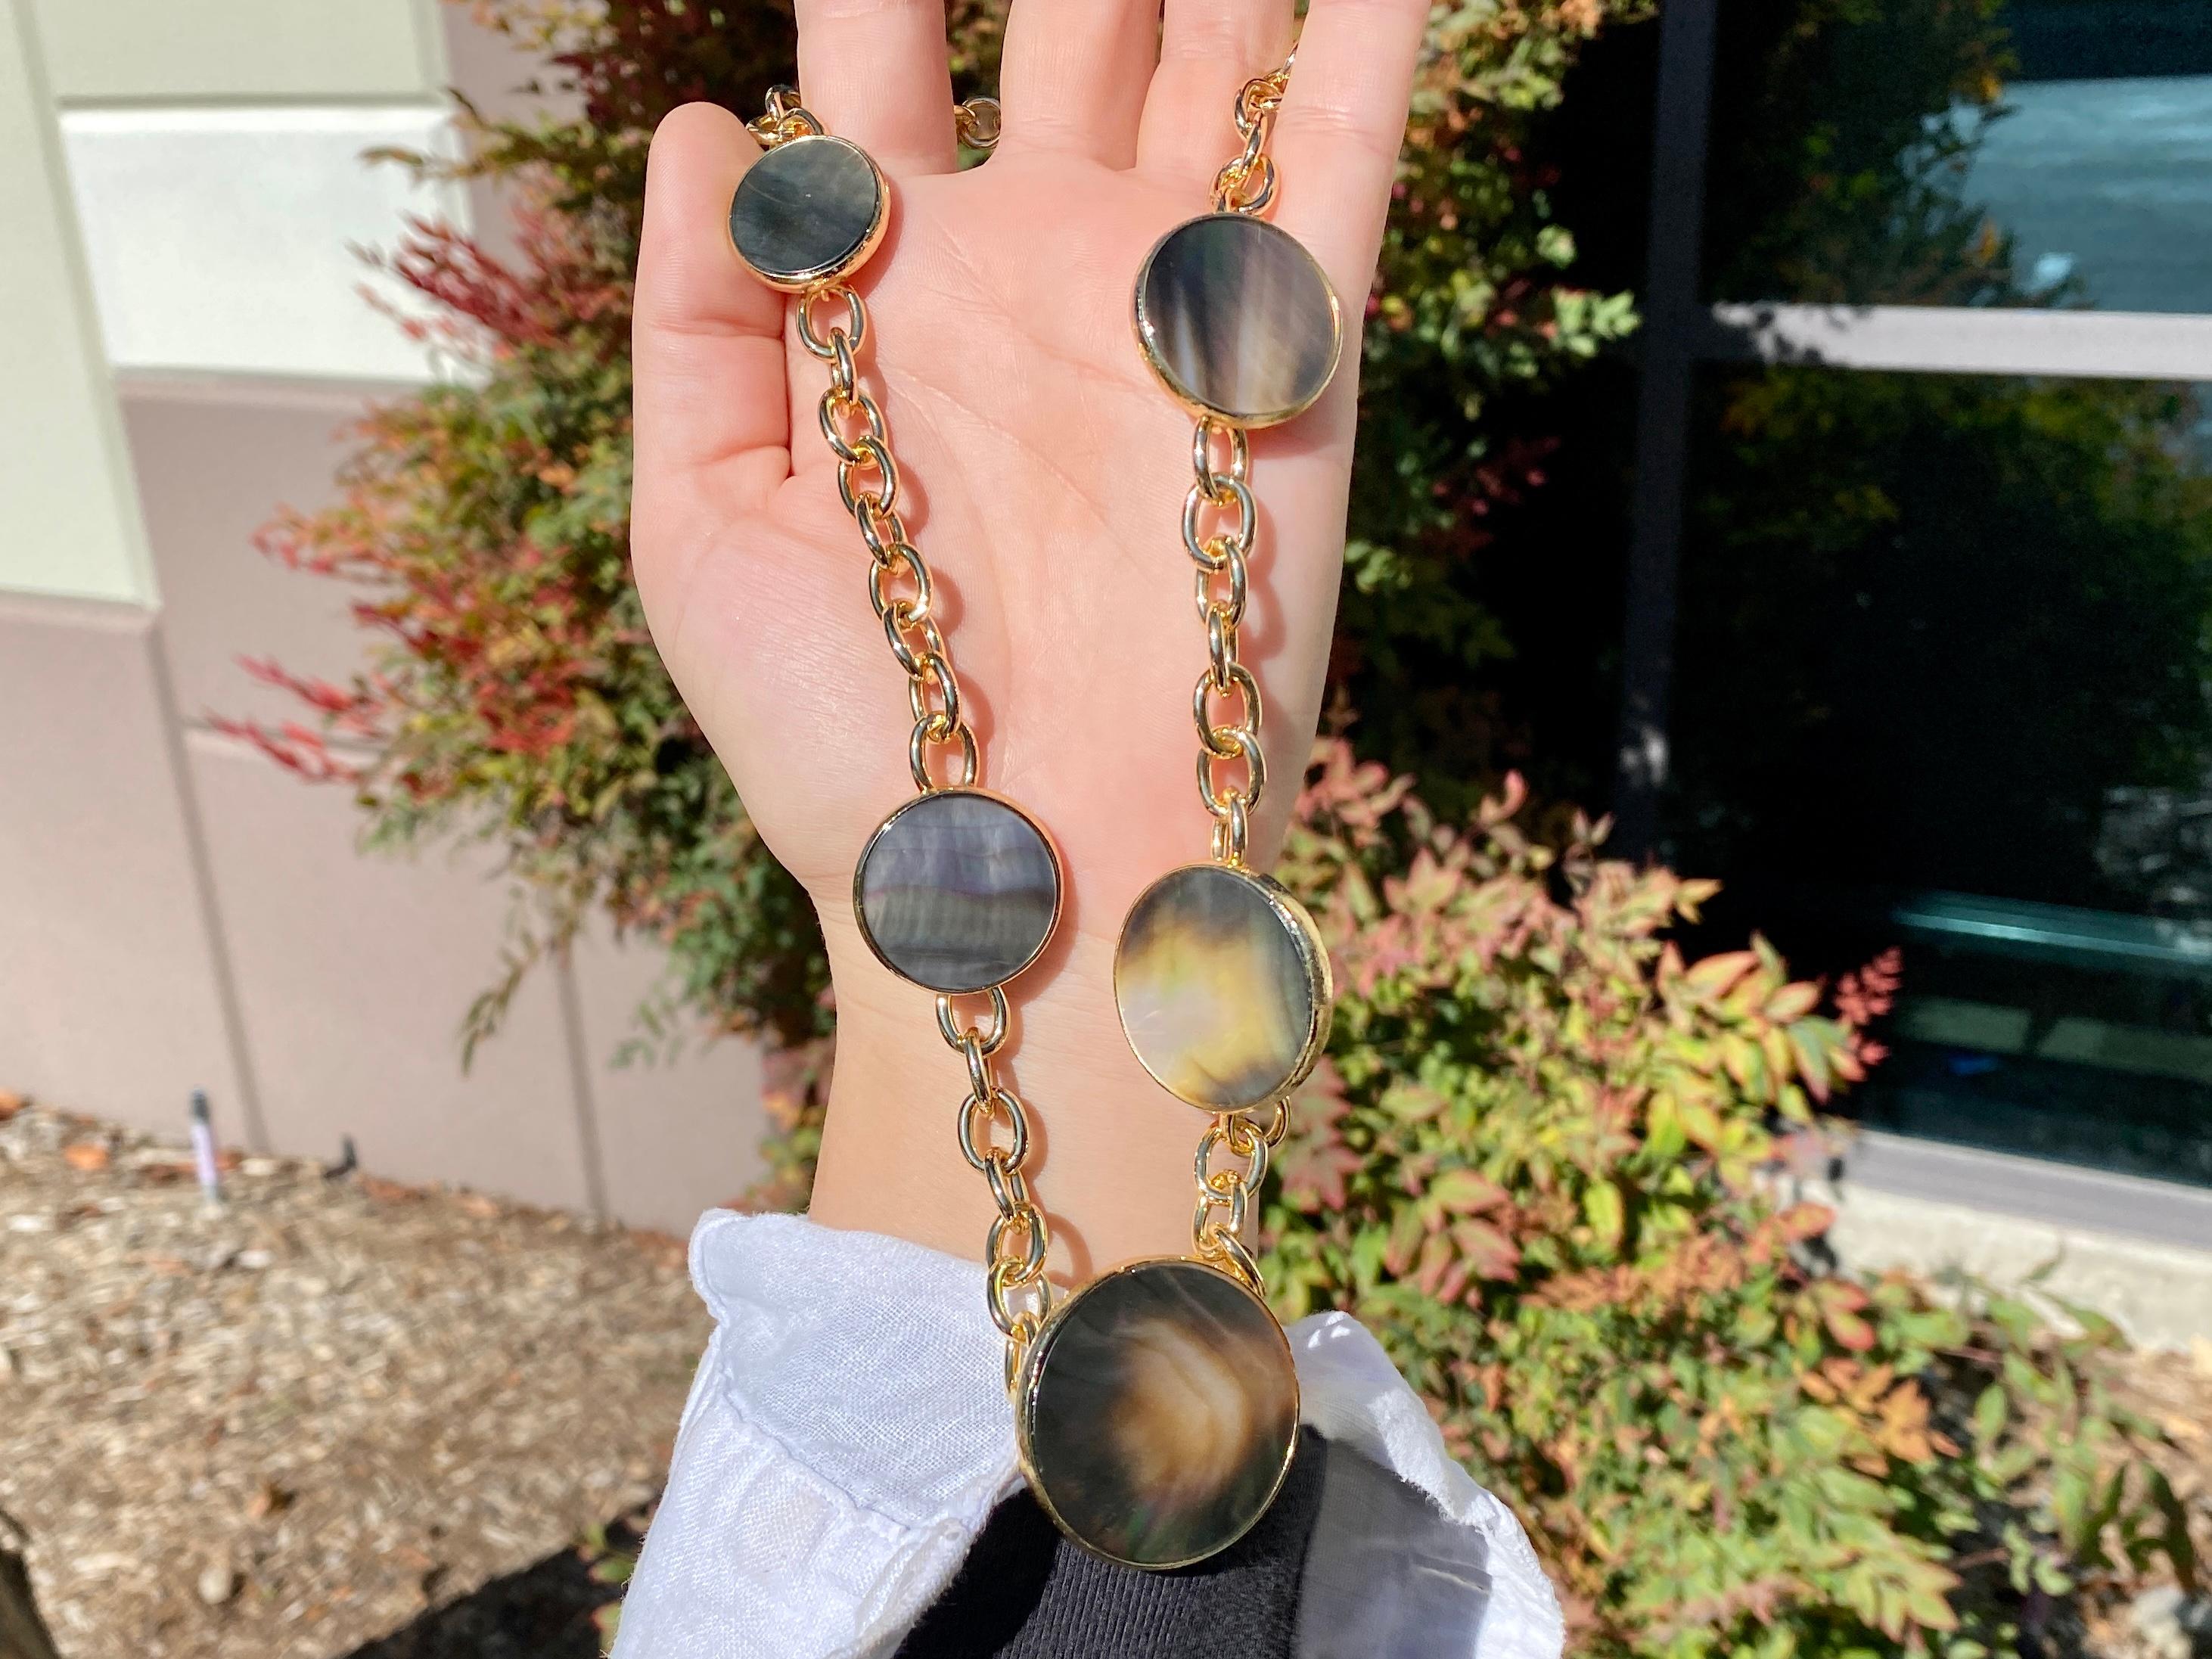 Materials:
Mother of Pearl
18K Gold Plated Brass﻿
Abalone

Measurements: Adjustable
Length: 7.9